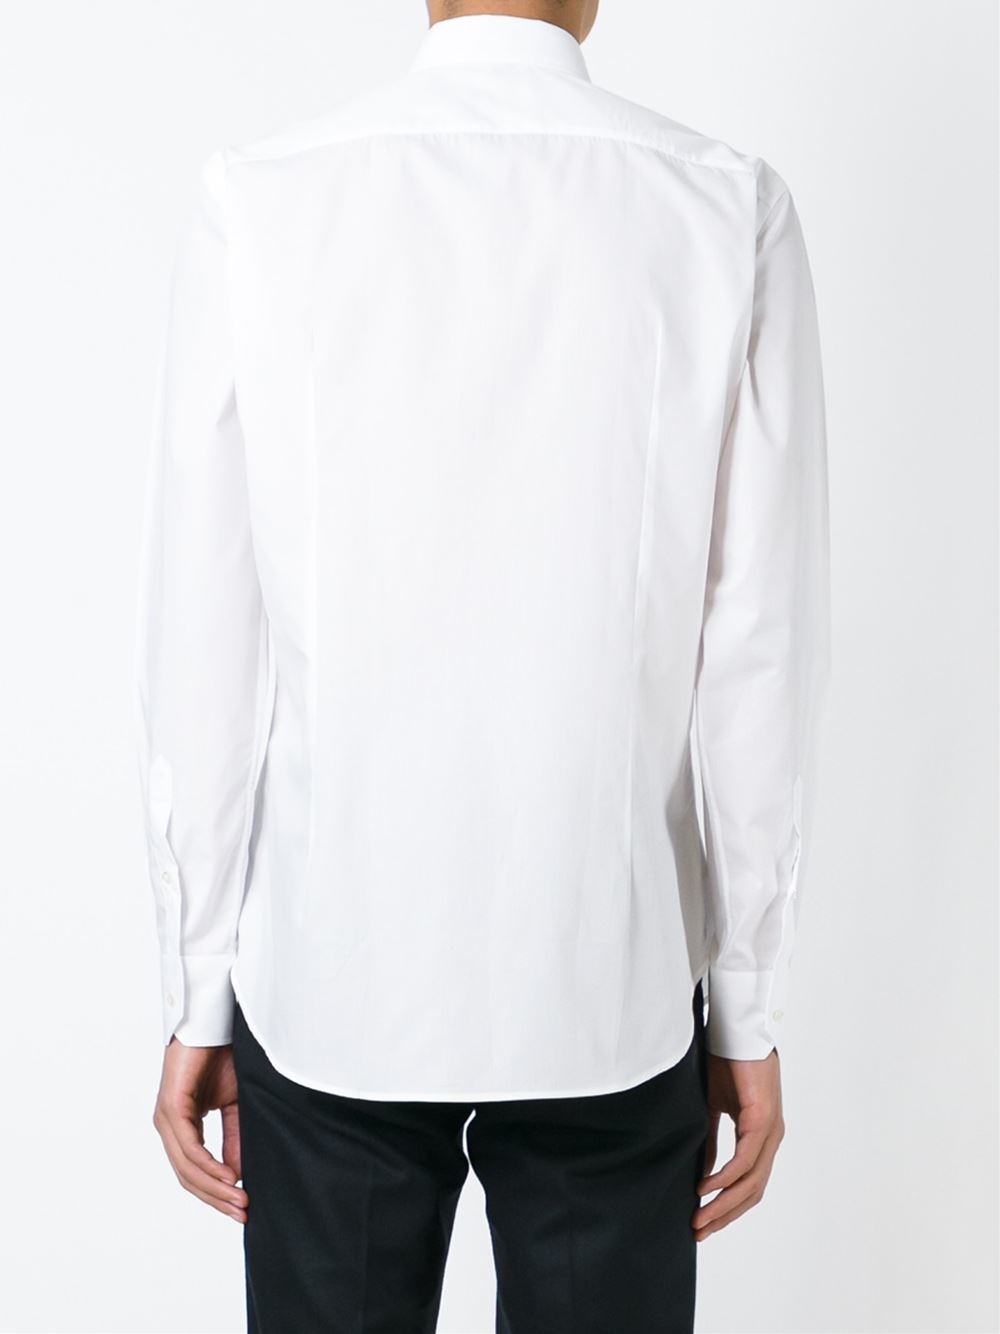 Etro Classic Shirt in White for Men - Lyst